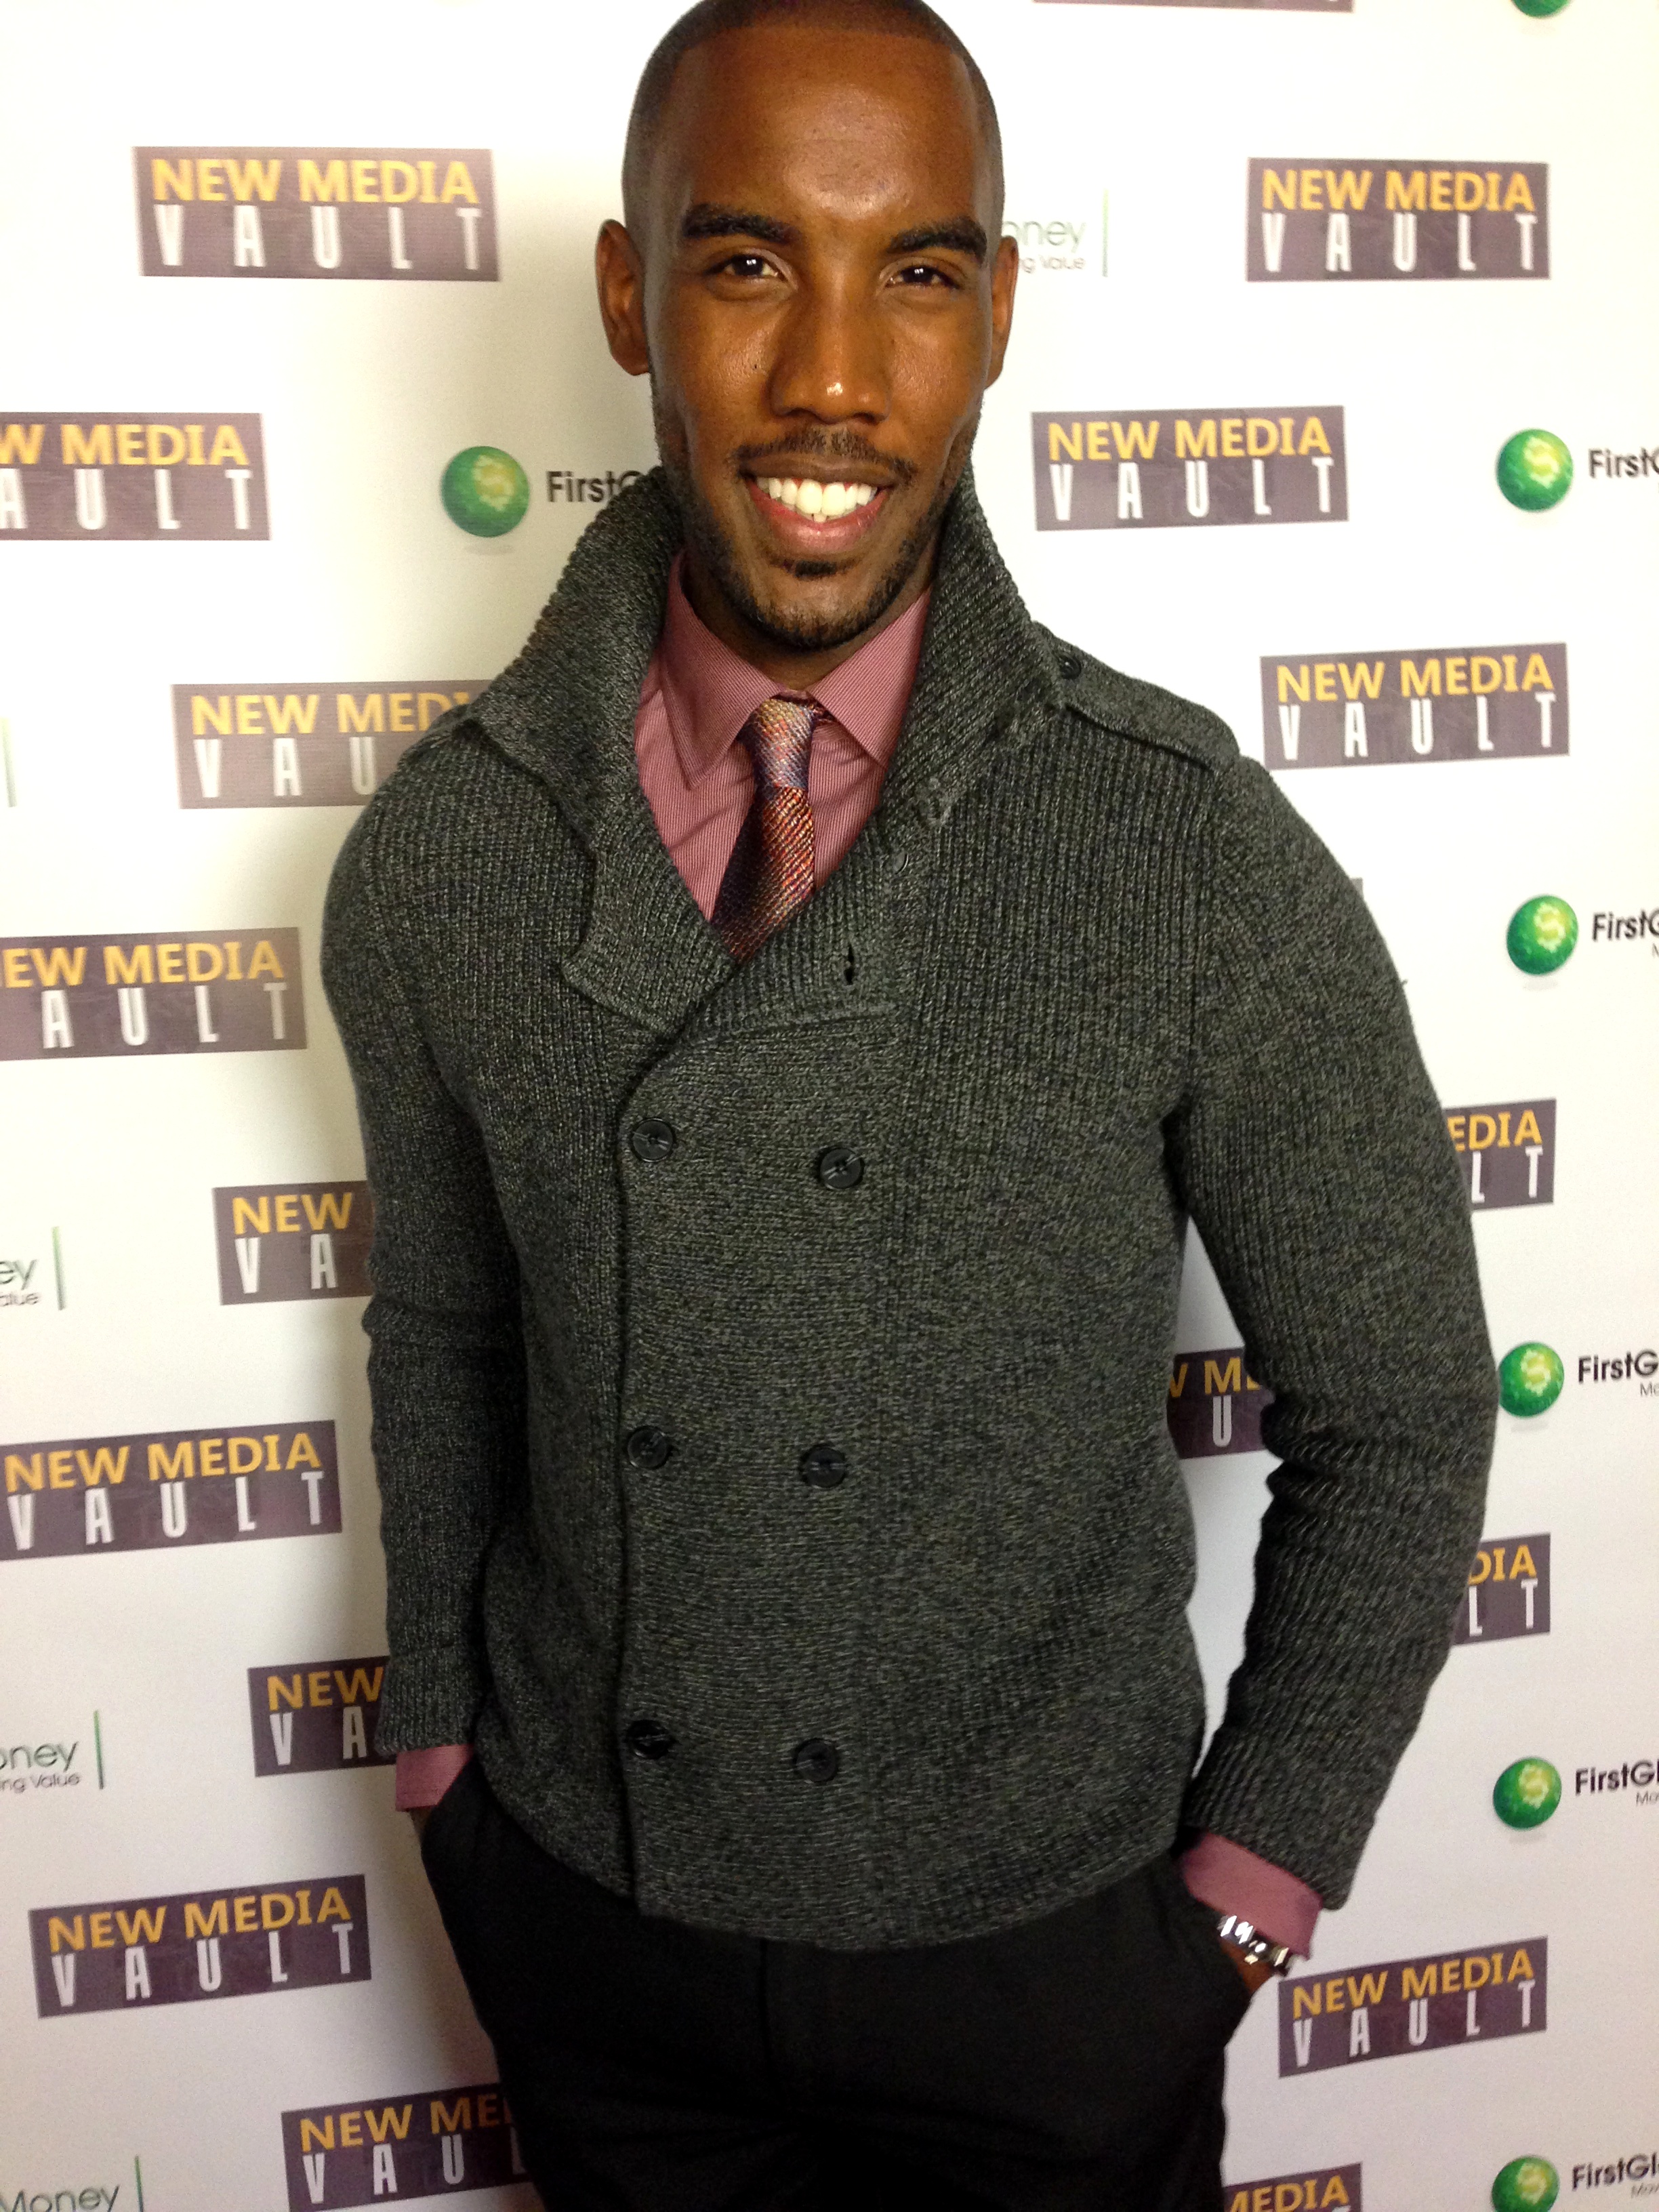 Ernest Pierce New Media Event for Directors in Hollywood